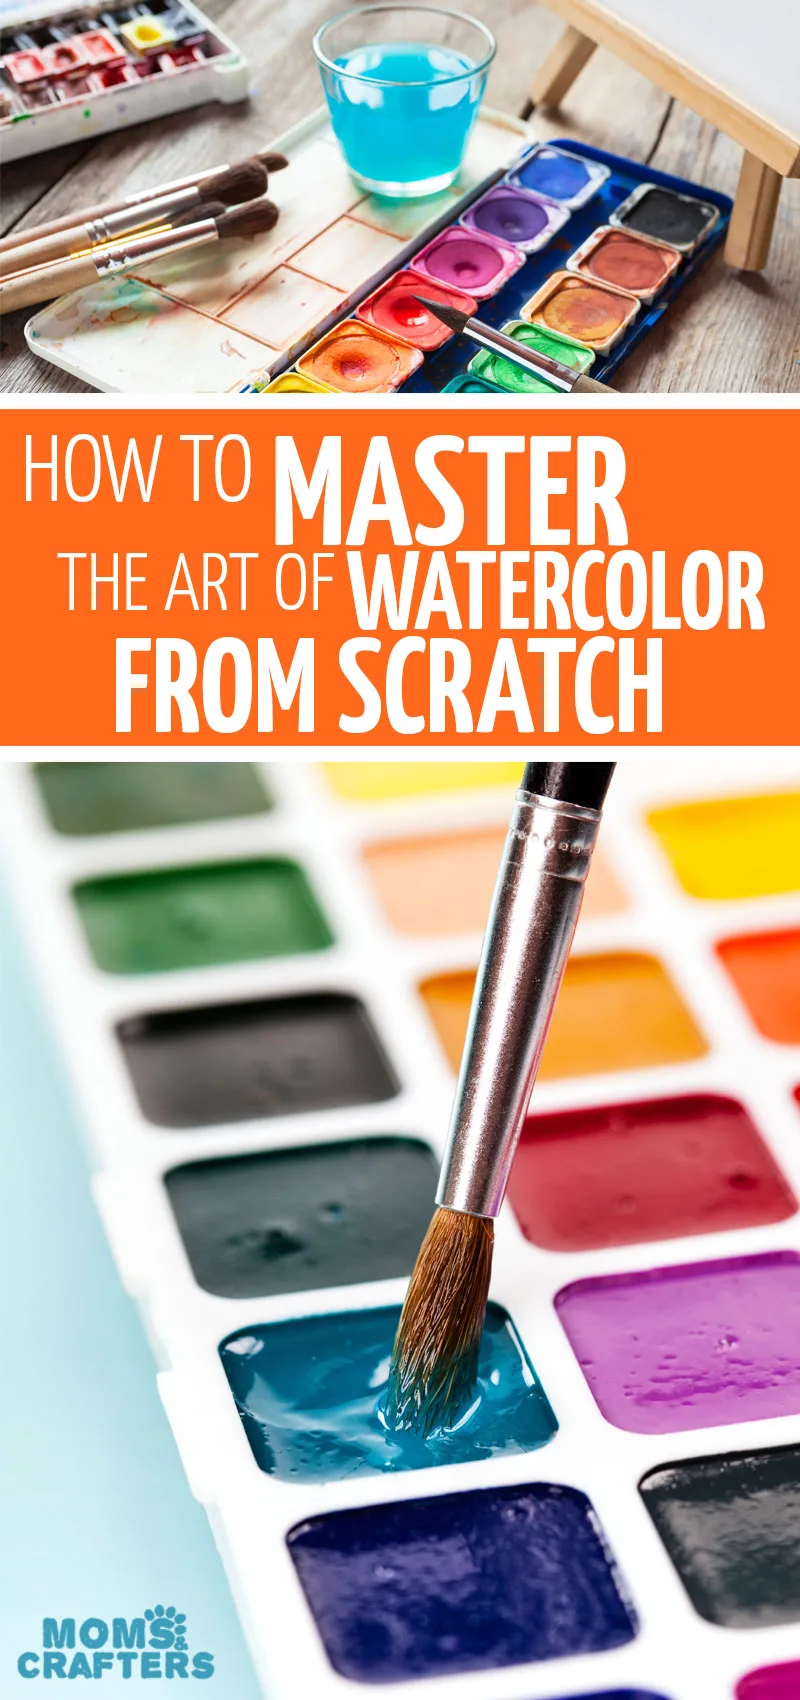 Click to learn how to watercolor from scratch with step by step watercolor tutorials for beginners! #watercolor #art #watercoloring